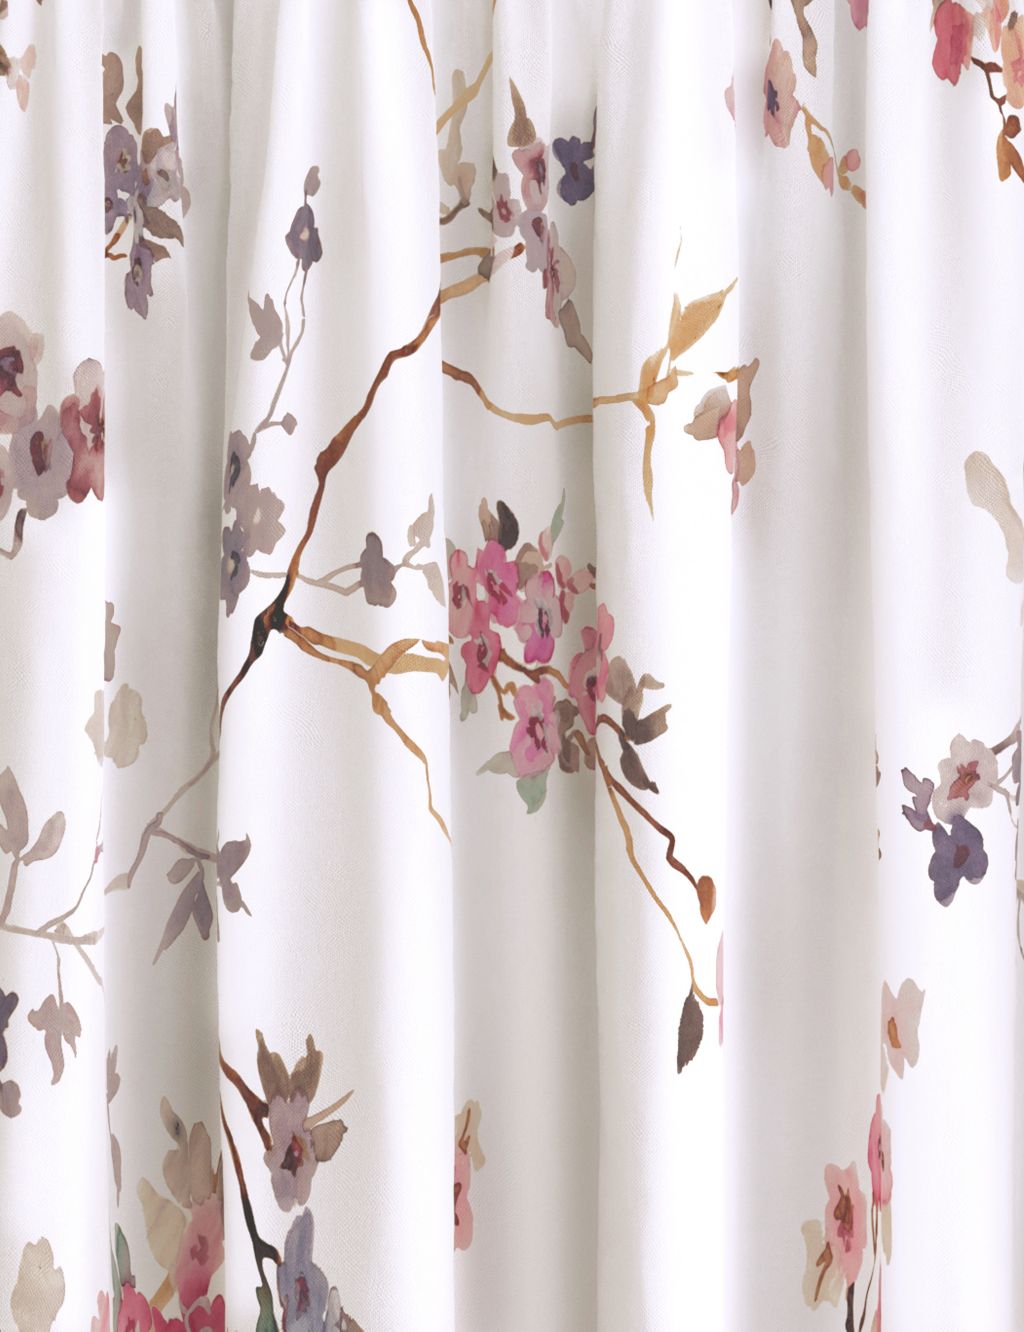 Sateen Cherry Blossom Pencil Pleat Blackout Curtains 1 of 6